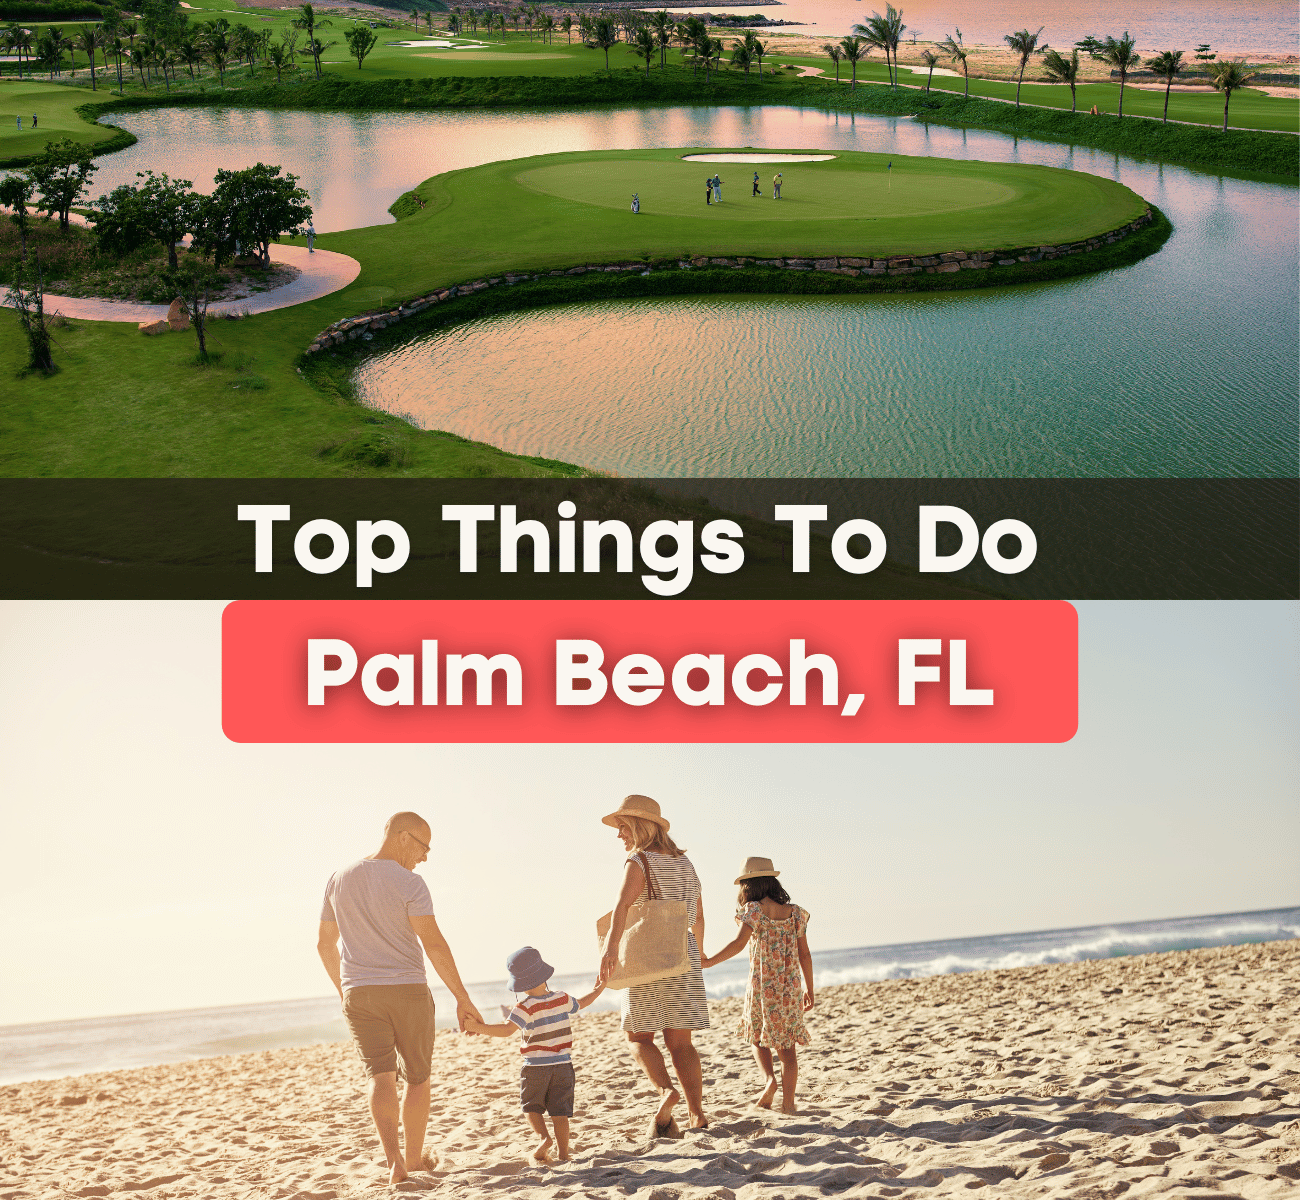 top things to do in Palm Beach, FL graphic - Palm Beach golf course and family on a beach